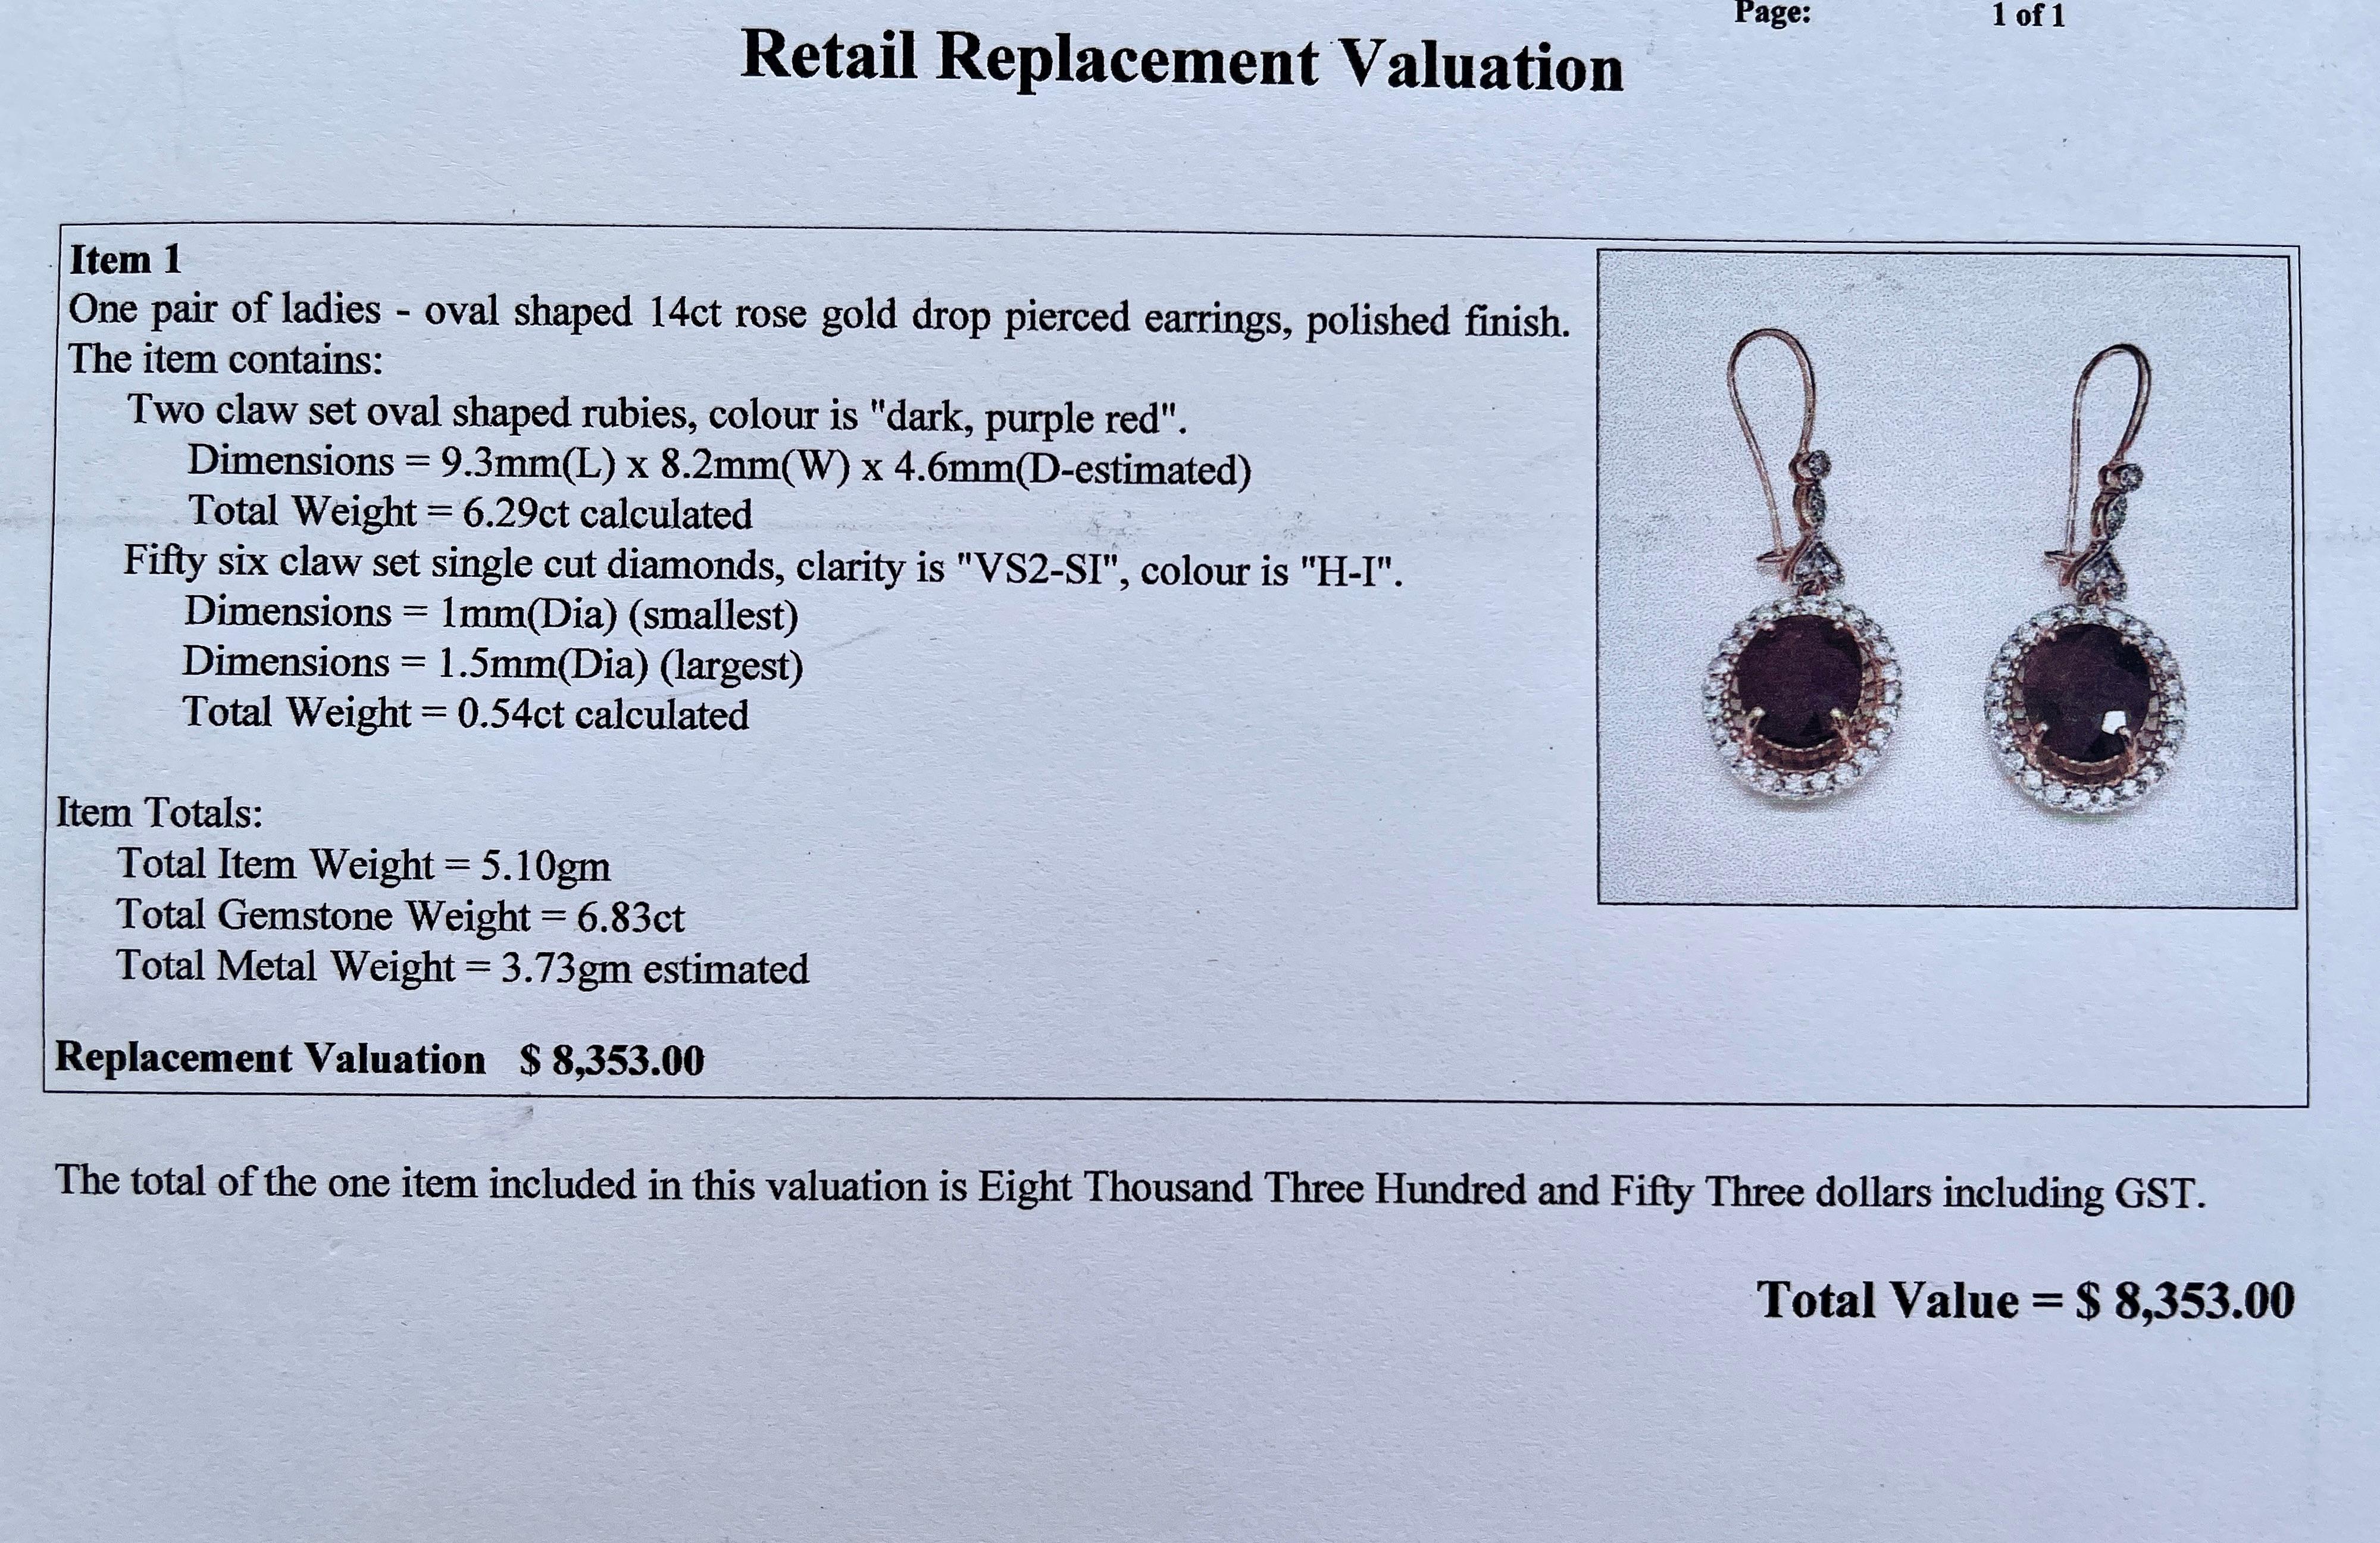 Round Cut Belle Epoque Style Ruby Diamond Dangle Hook Earrings 14ct Rose Gold Valuation For Sale